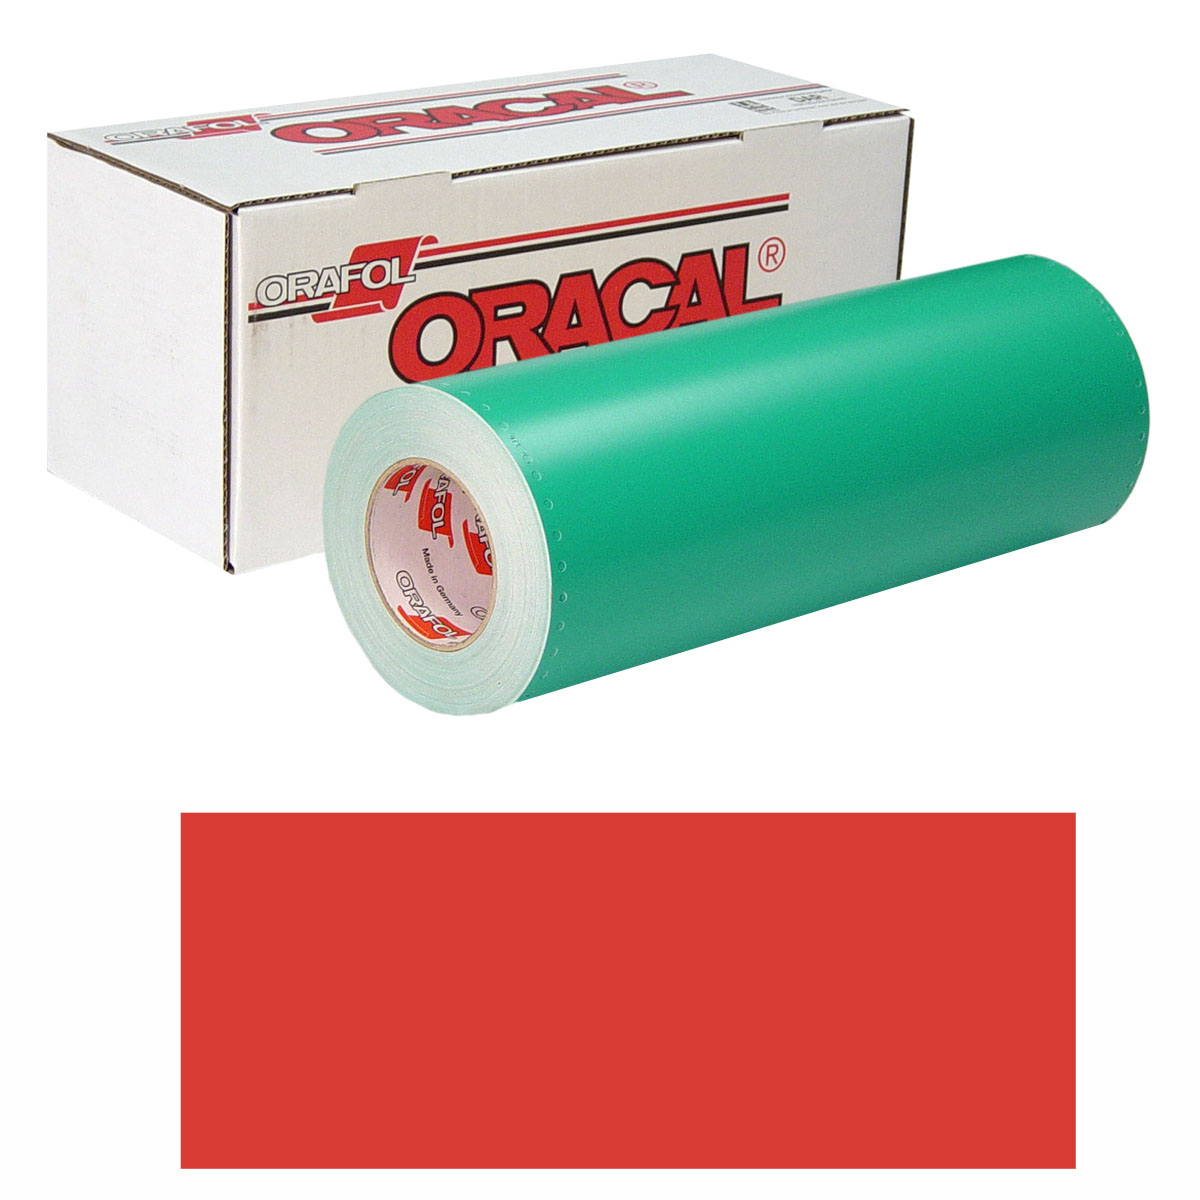 ORACAL 8500 30in X 10yd 329 Carnation Red